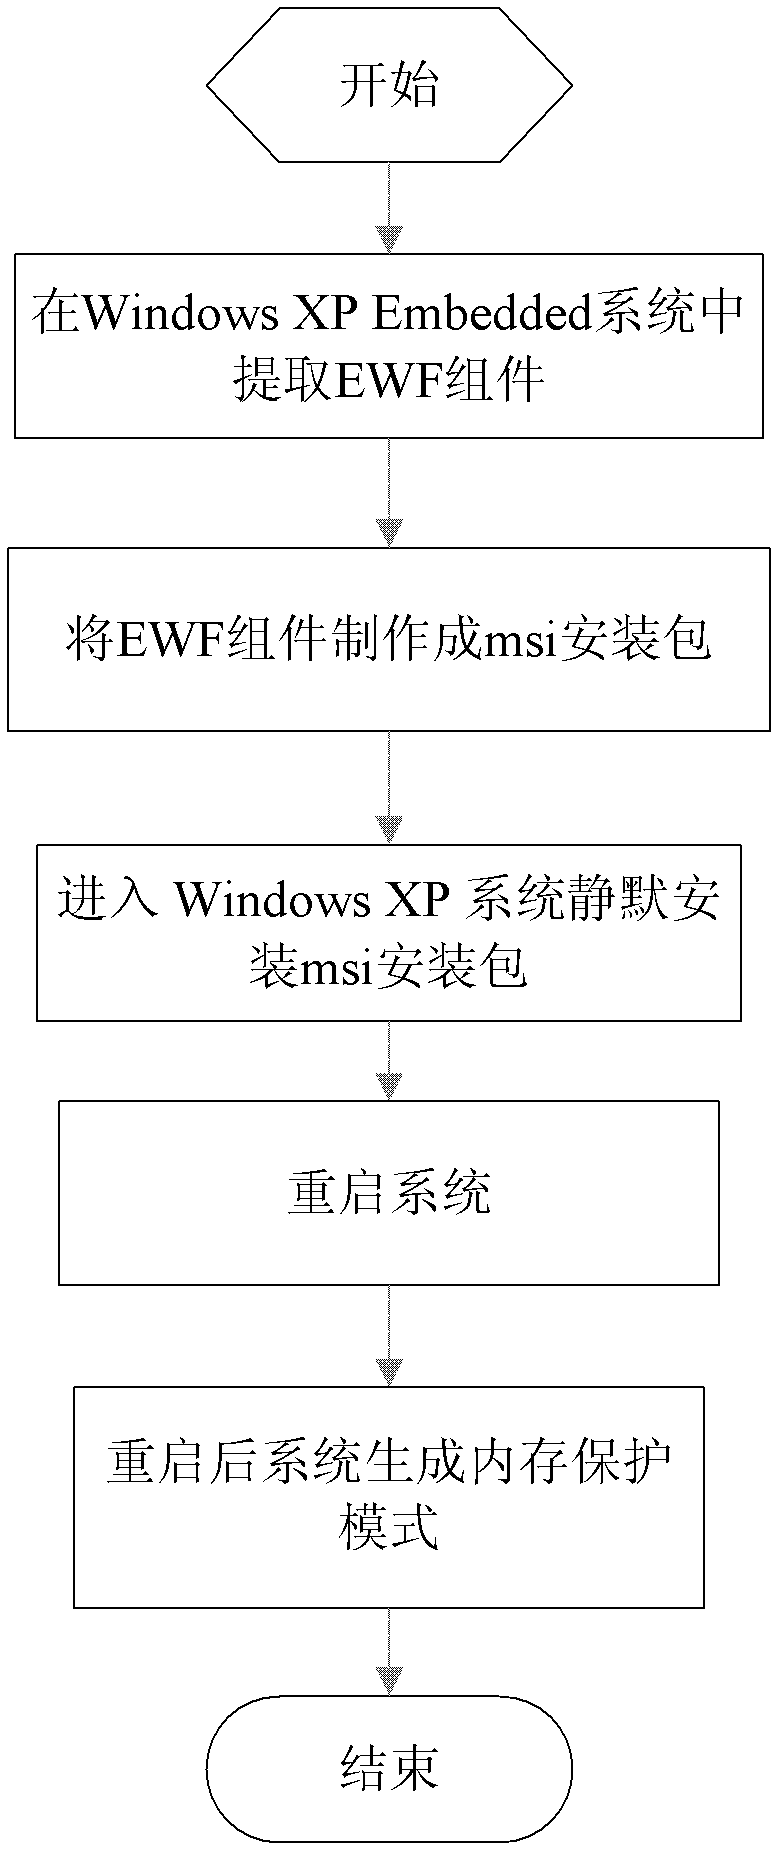 Method for Window XP system to realize memory protection mode